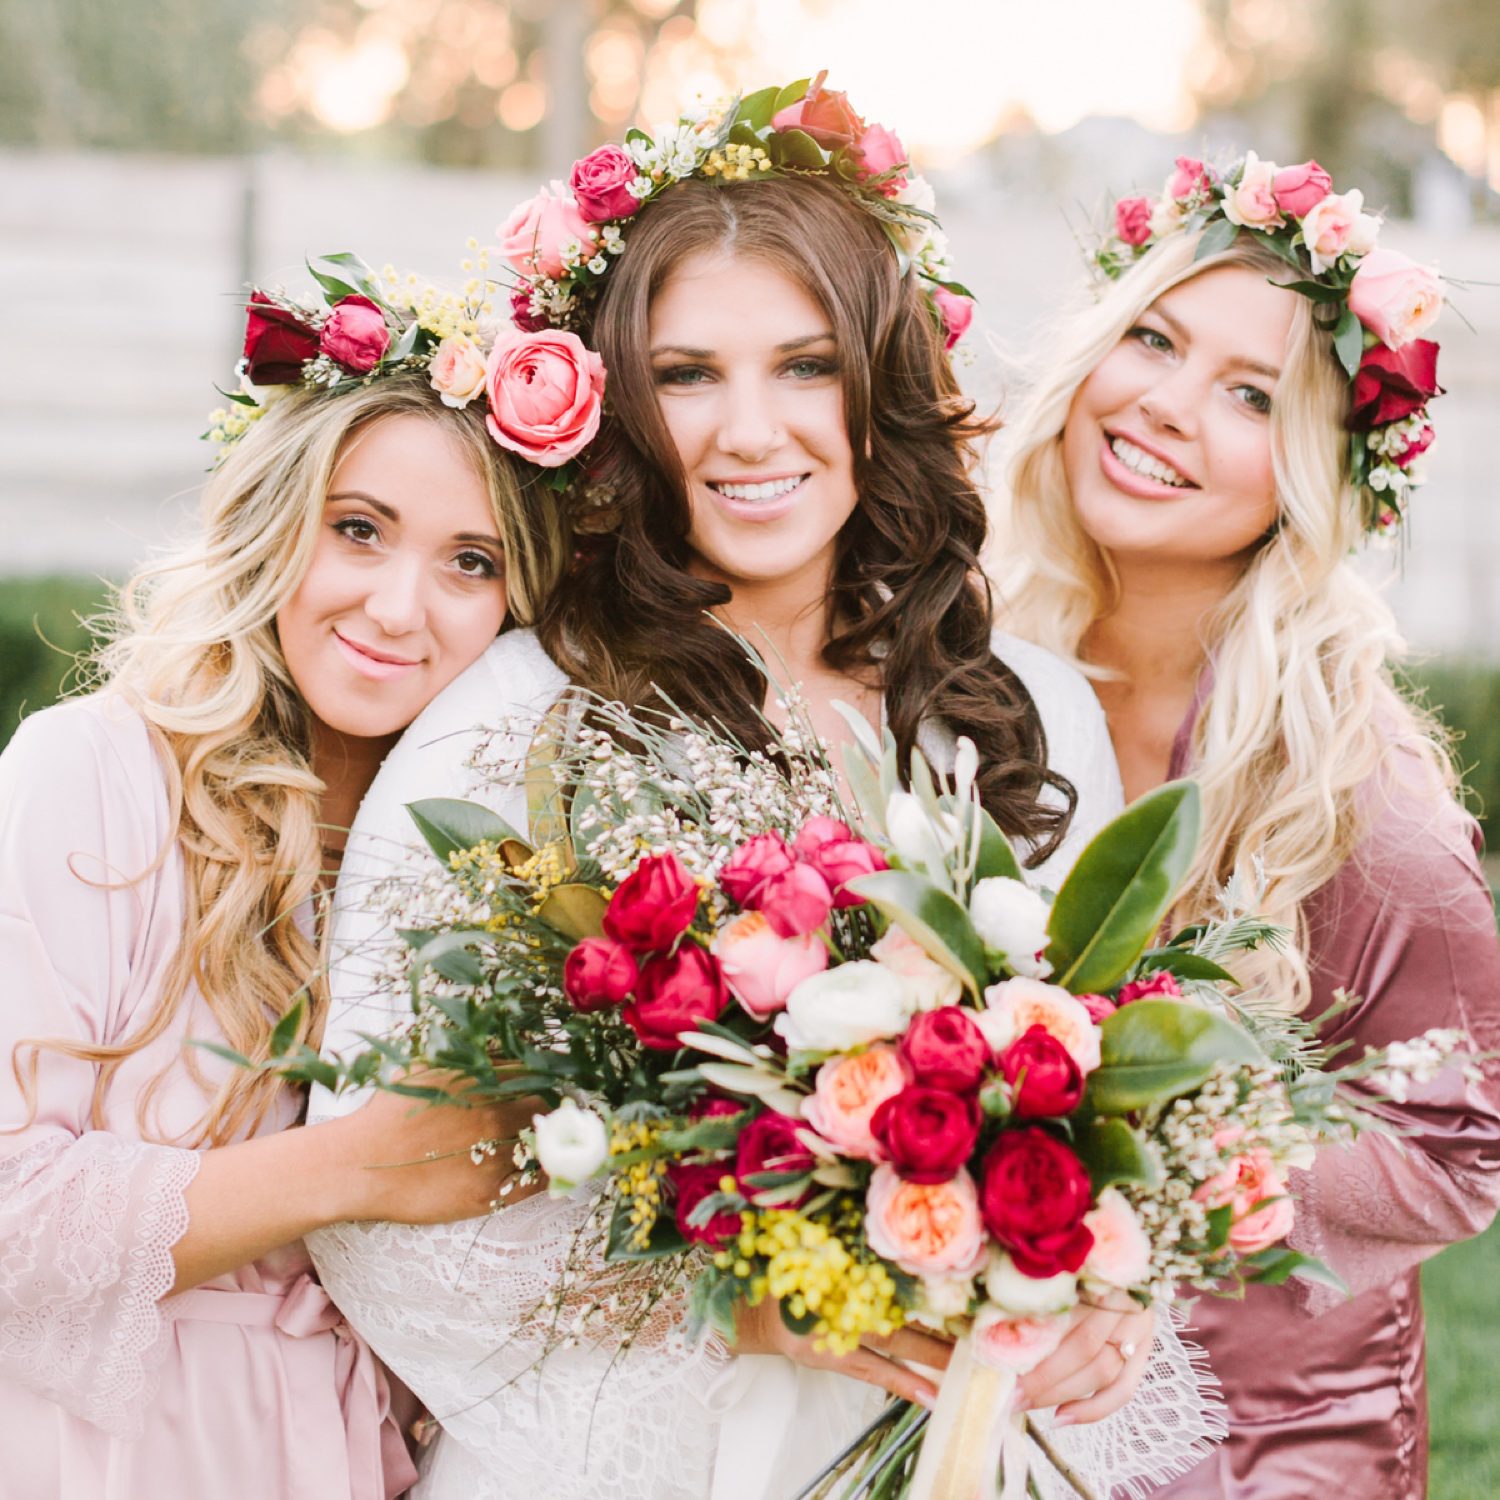 Bridesmaids and bride wearing matching robes and flower crowns